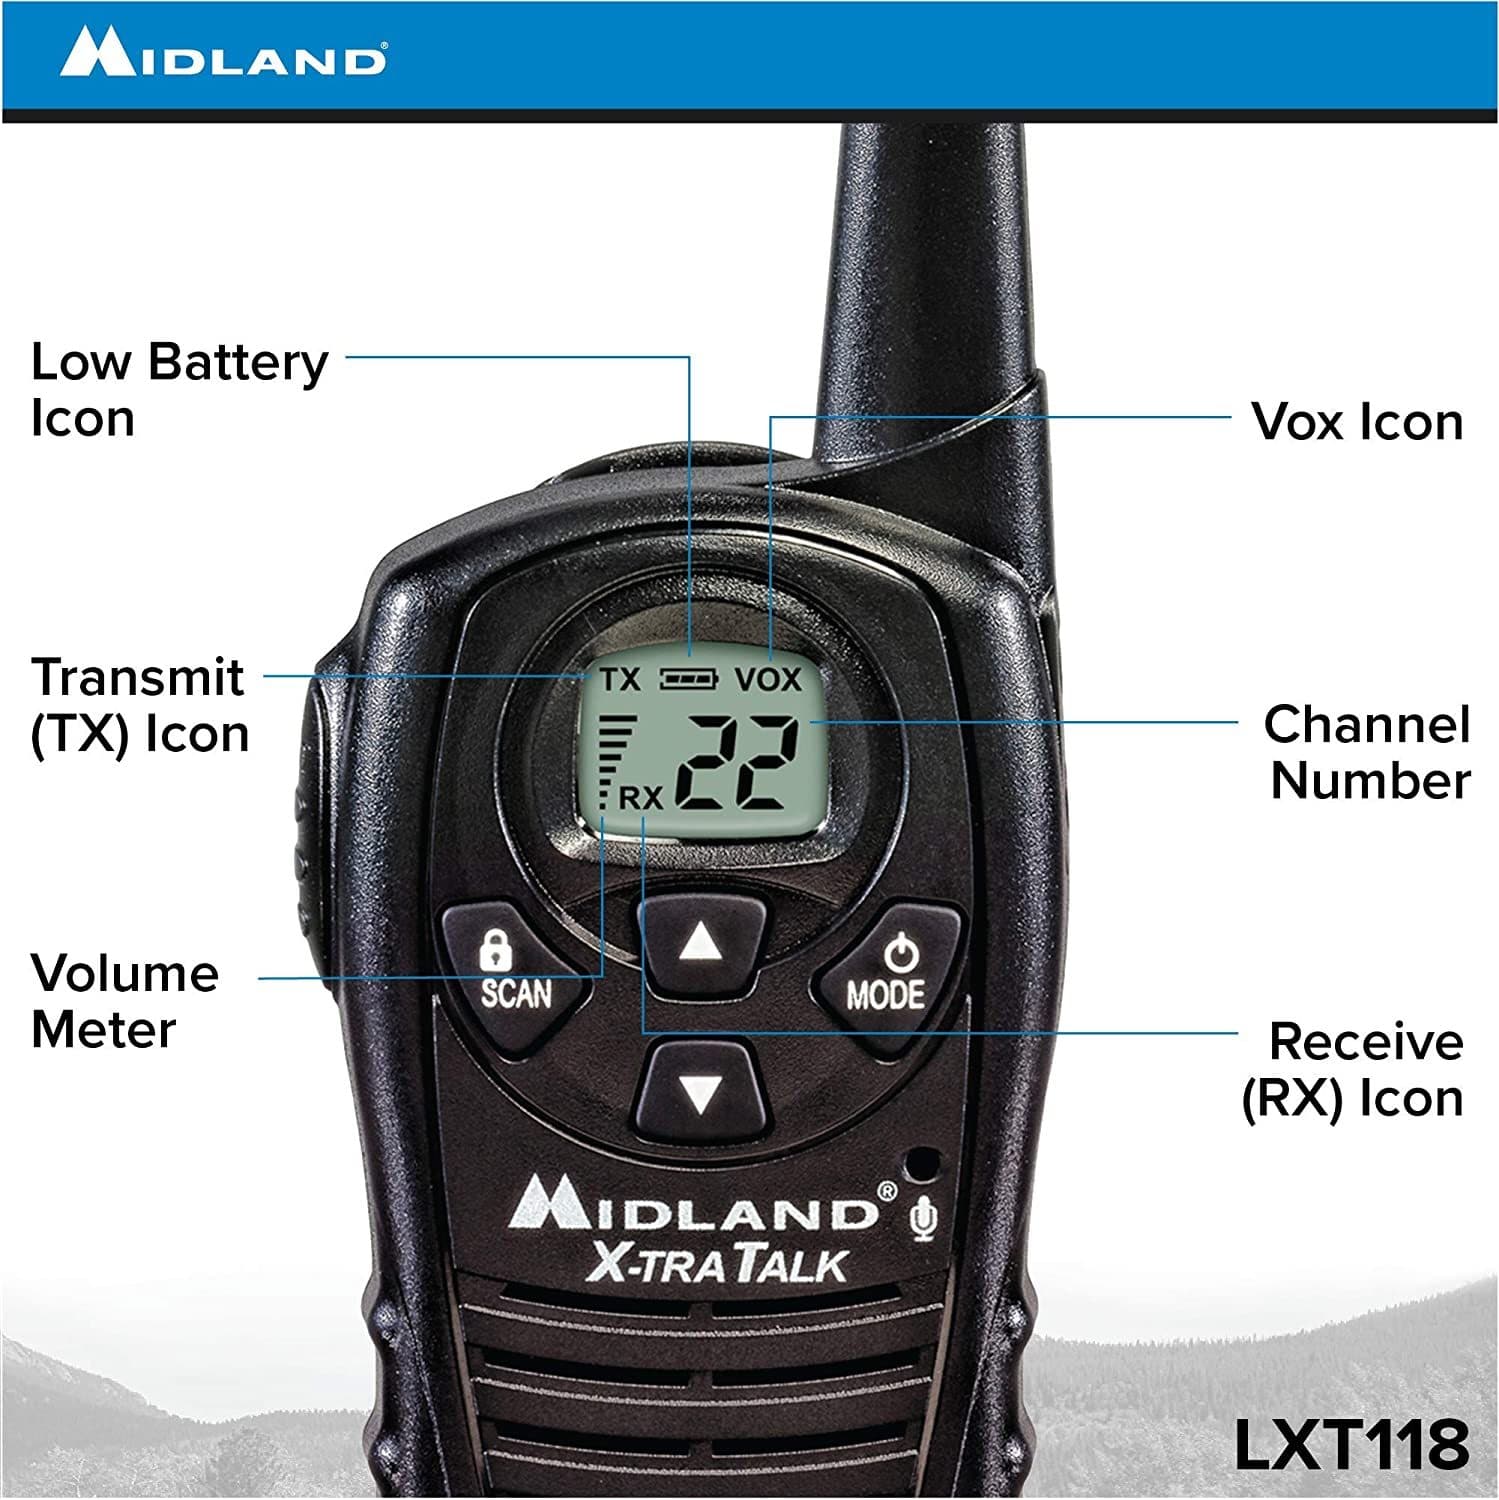 Midland LXT118VP 22-Channel GMRS with 18-Mile Range